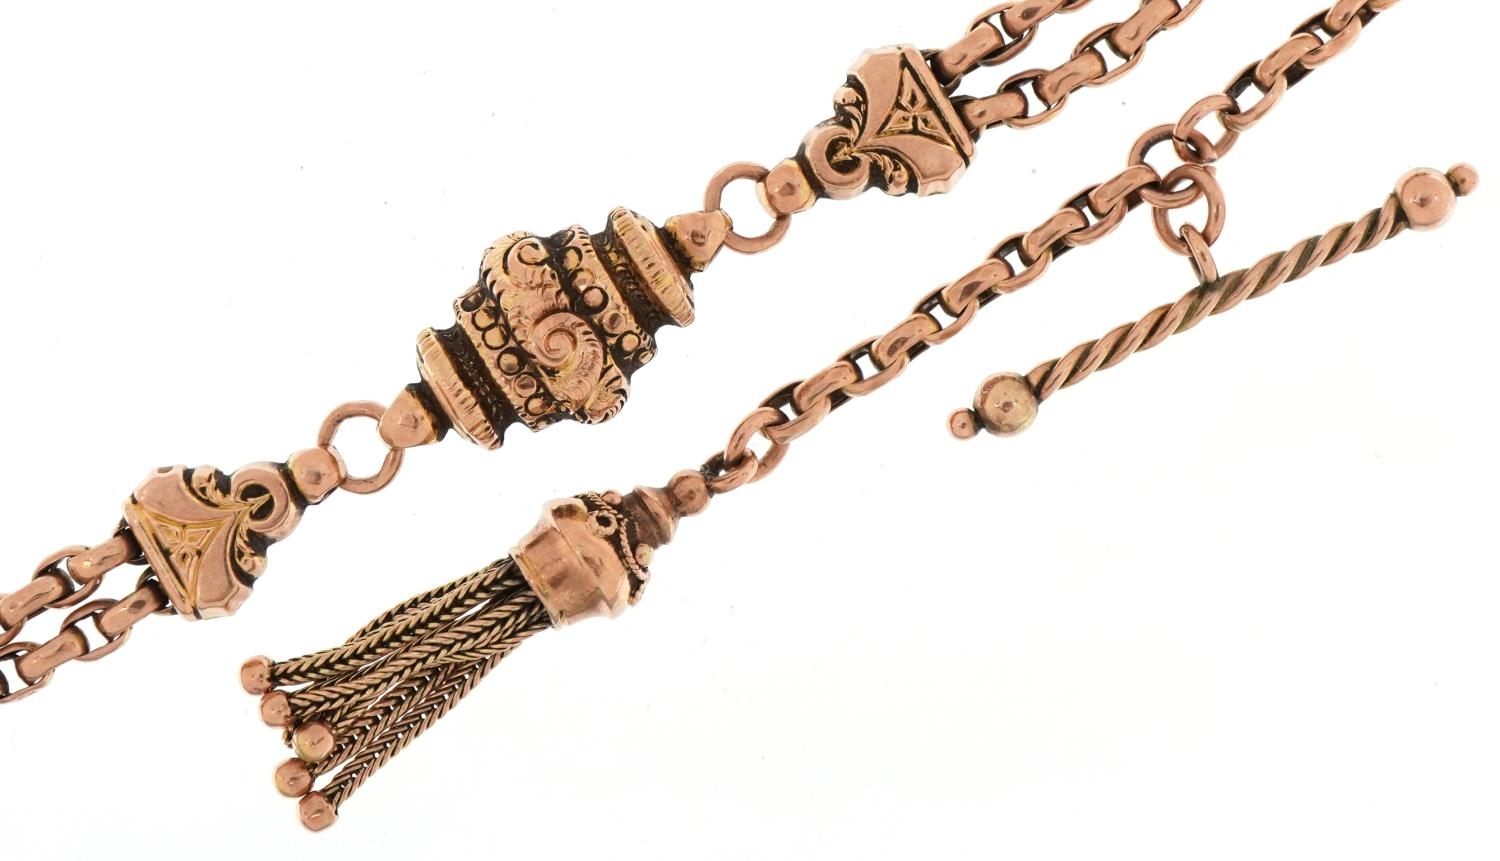 Victorian 9ct rose gold watch chain with T bar, dog clip clasp and tassel, 26cm in length, 11.7g - Image 2 of 3